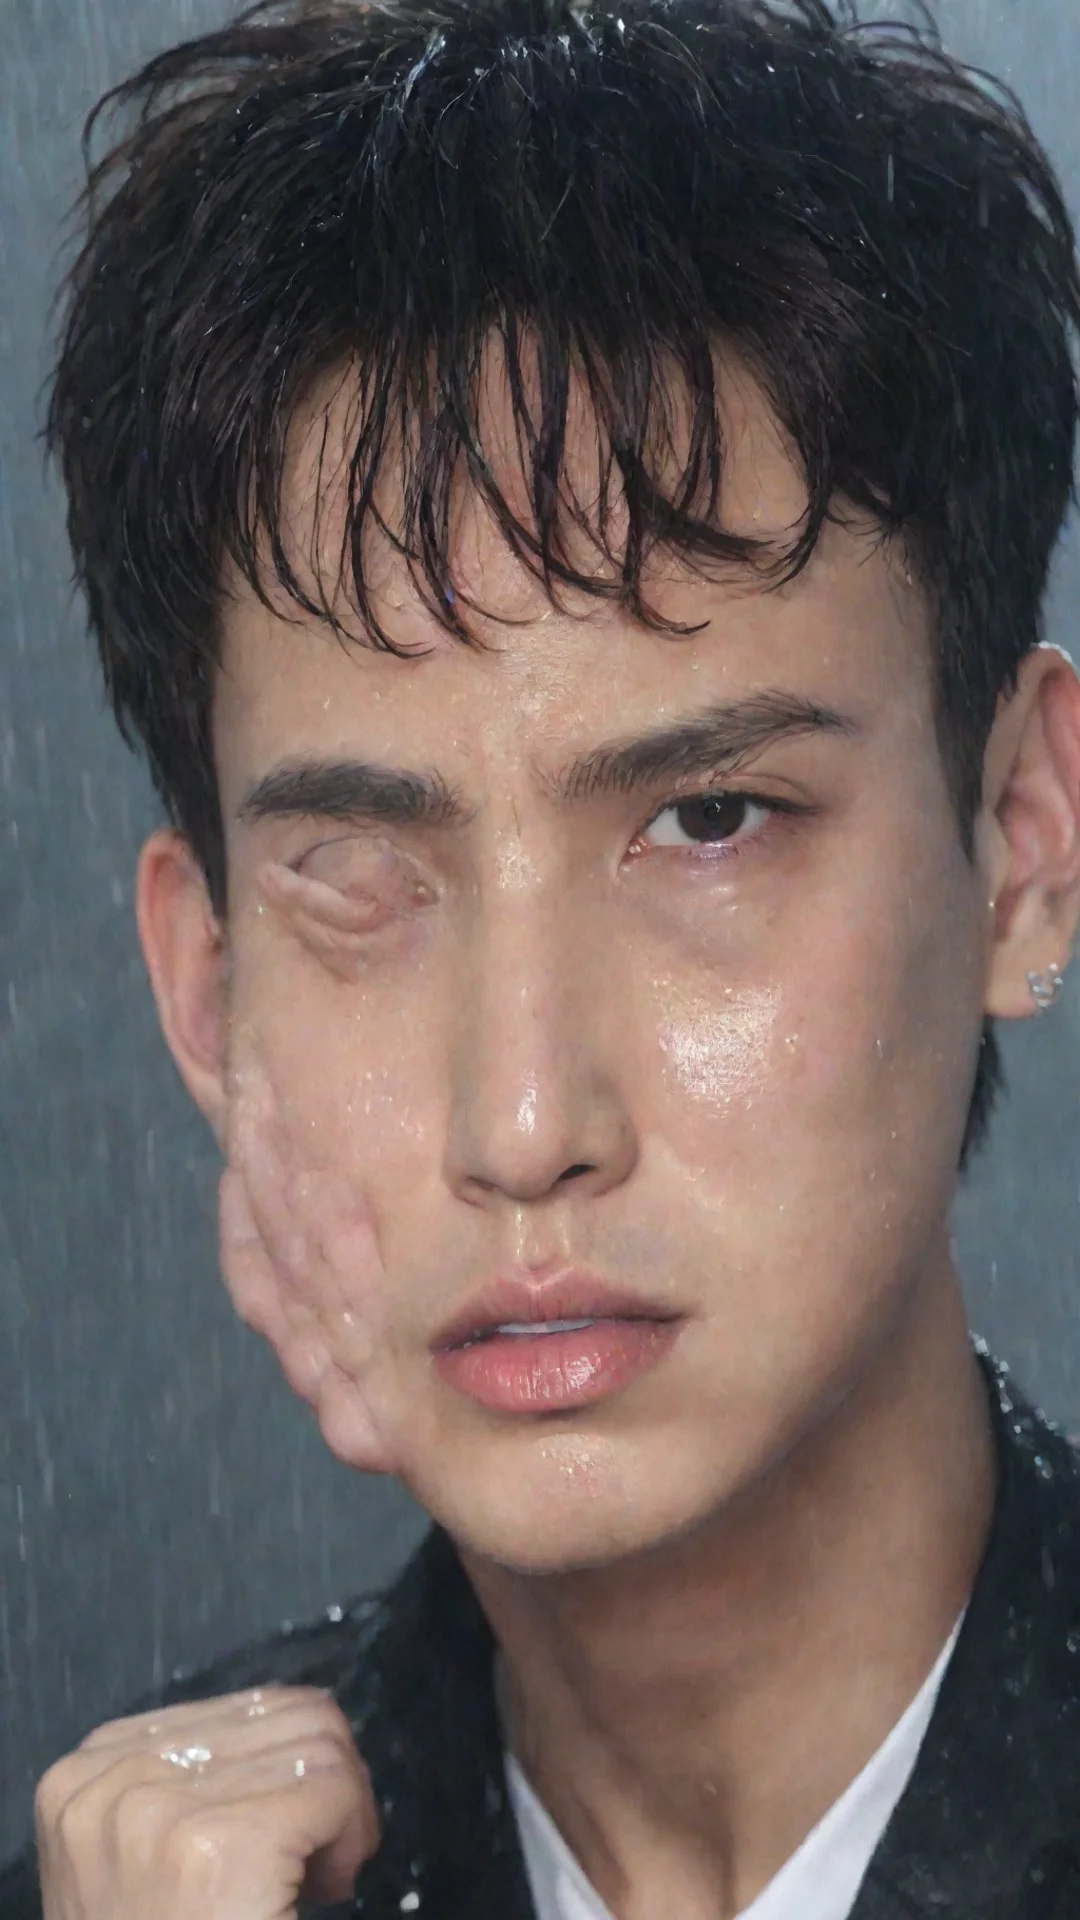 artist jungkook from bts cries in the heavy rain tall